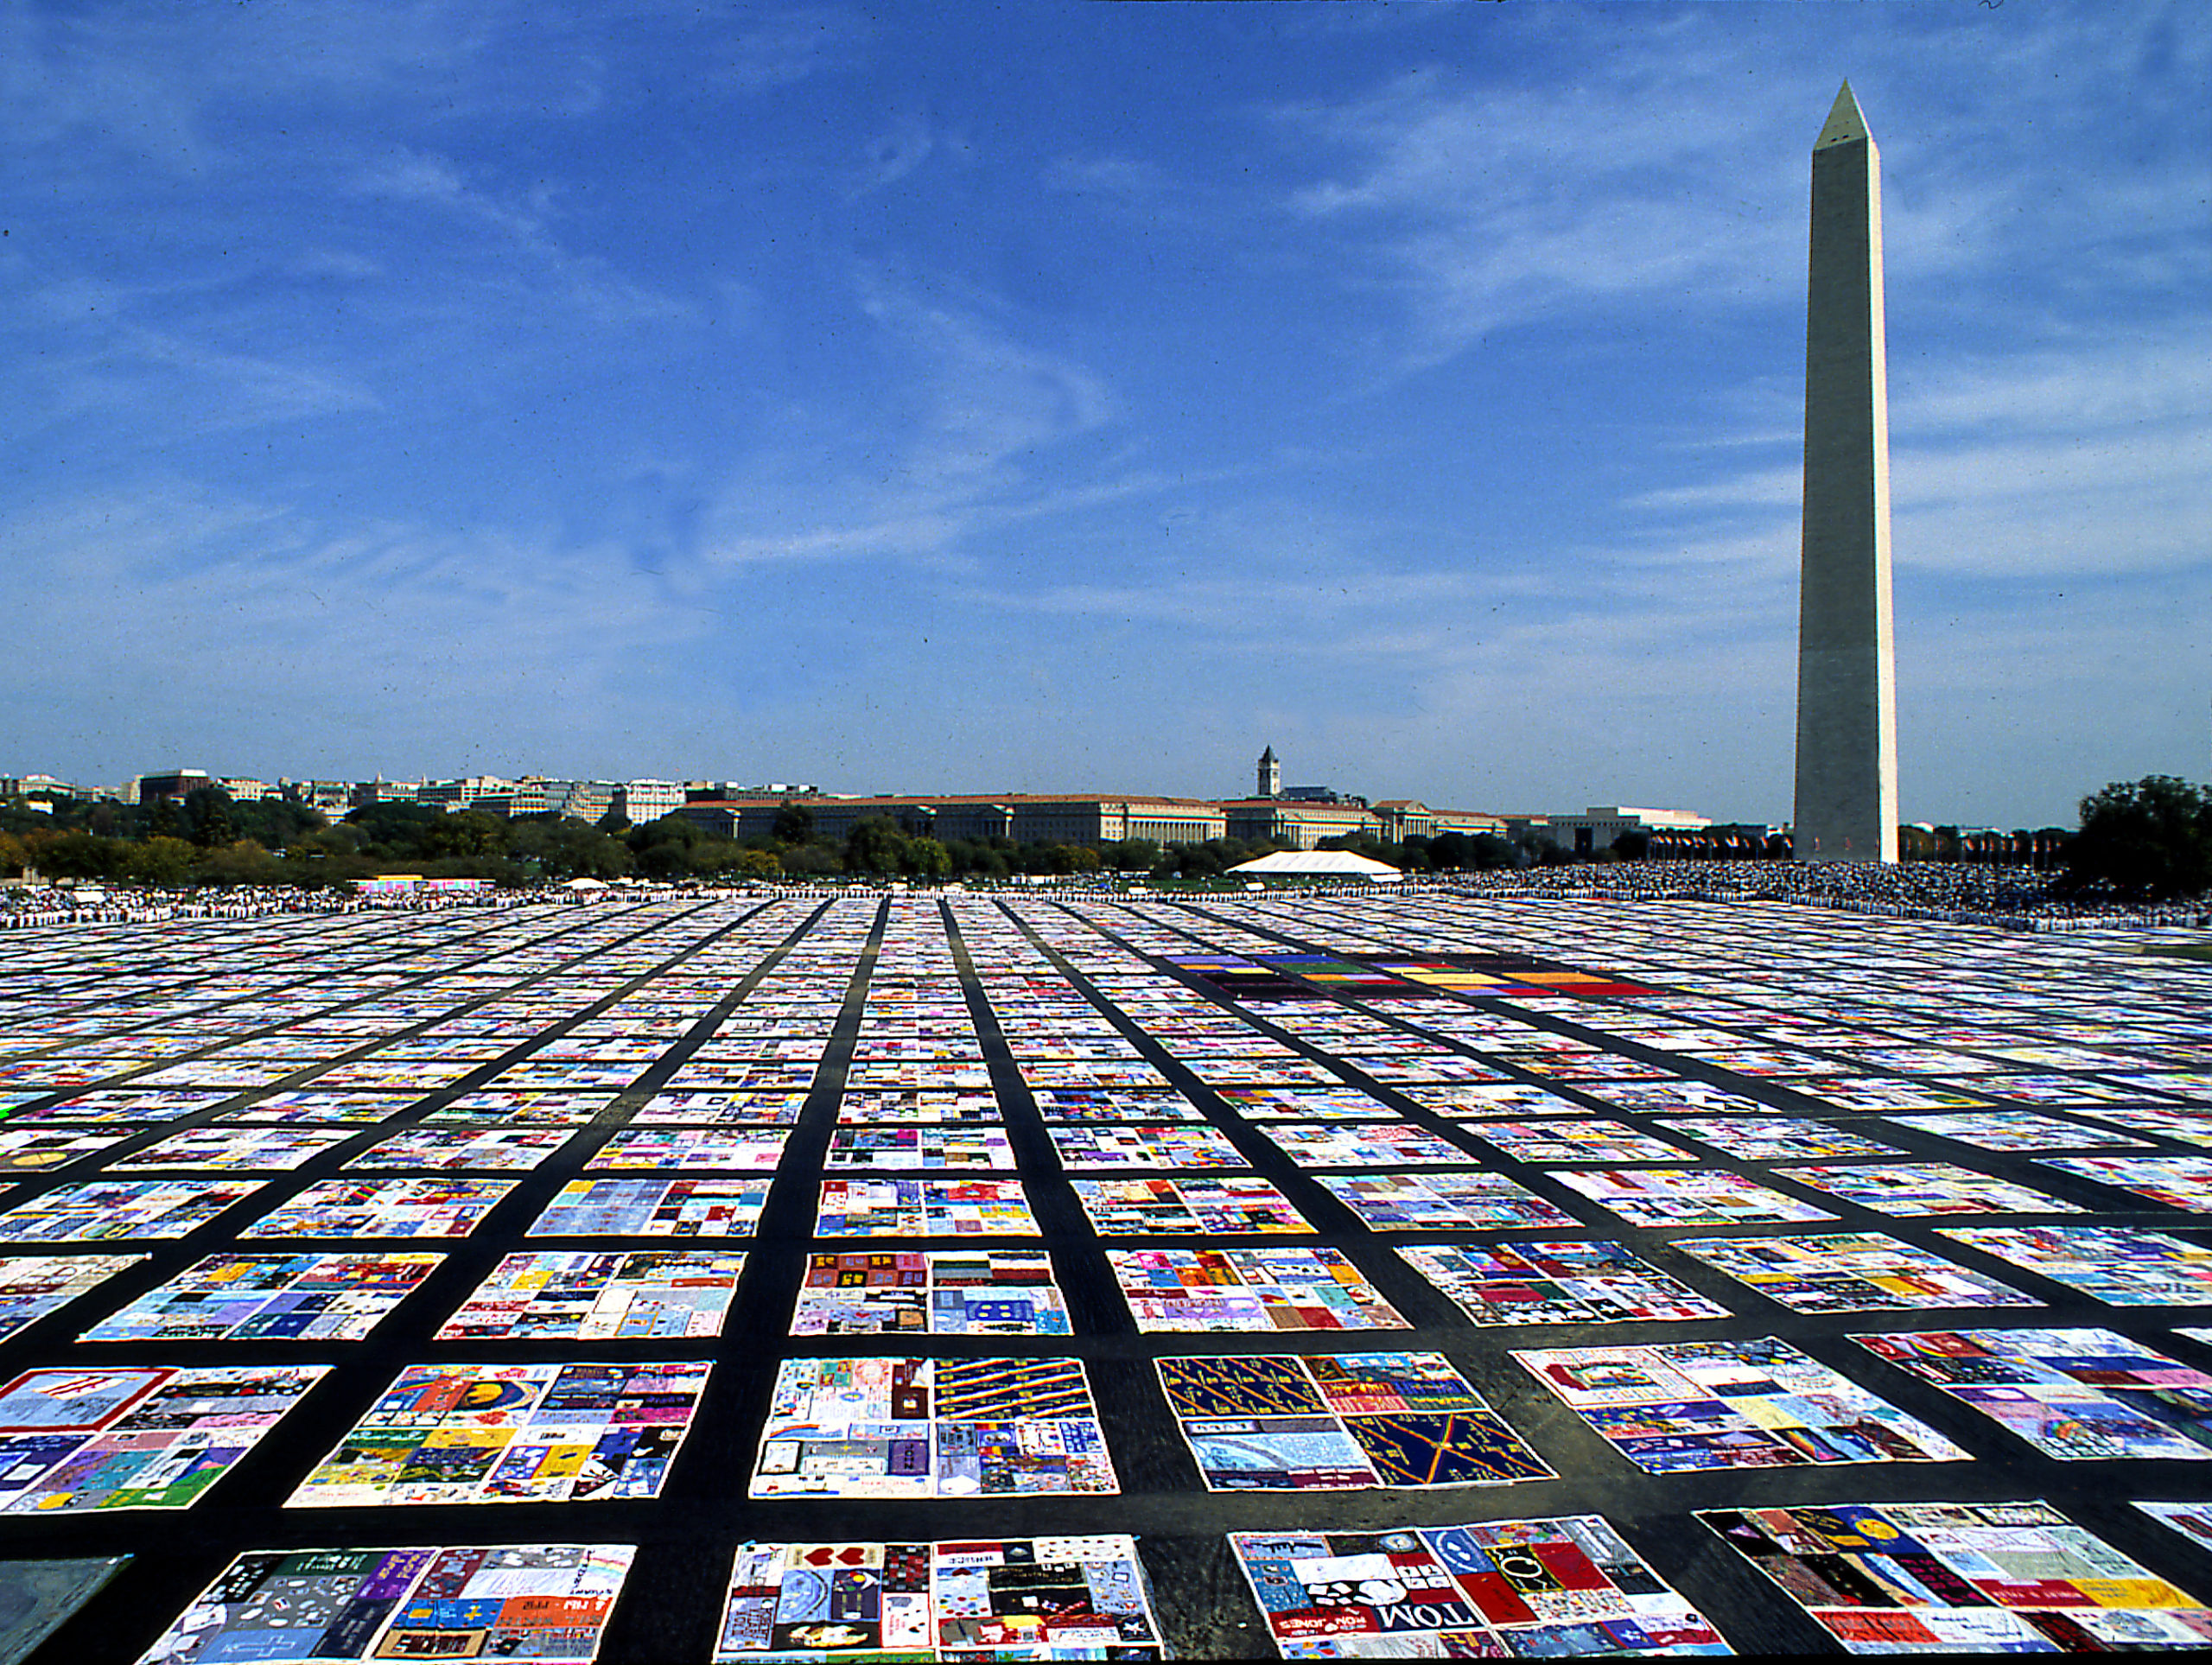 Display of the AIDS Memorial Quilt, National Mall, Washington, DC, 1987 / courtesy National AIDS Memorial.